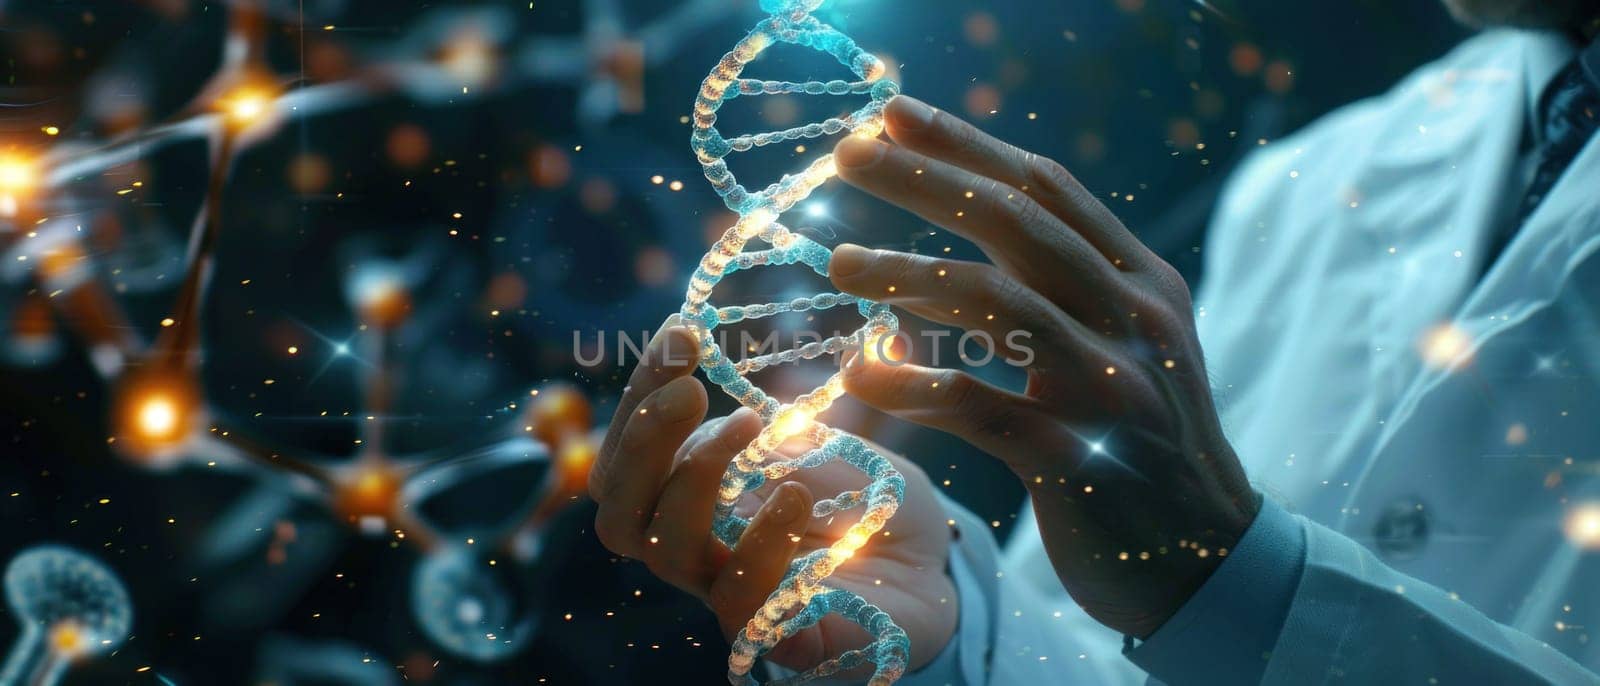 A person is holding a DNA strand in their hands.